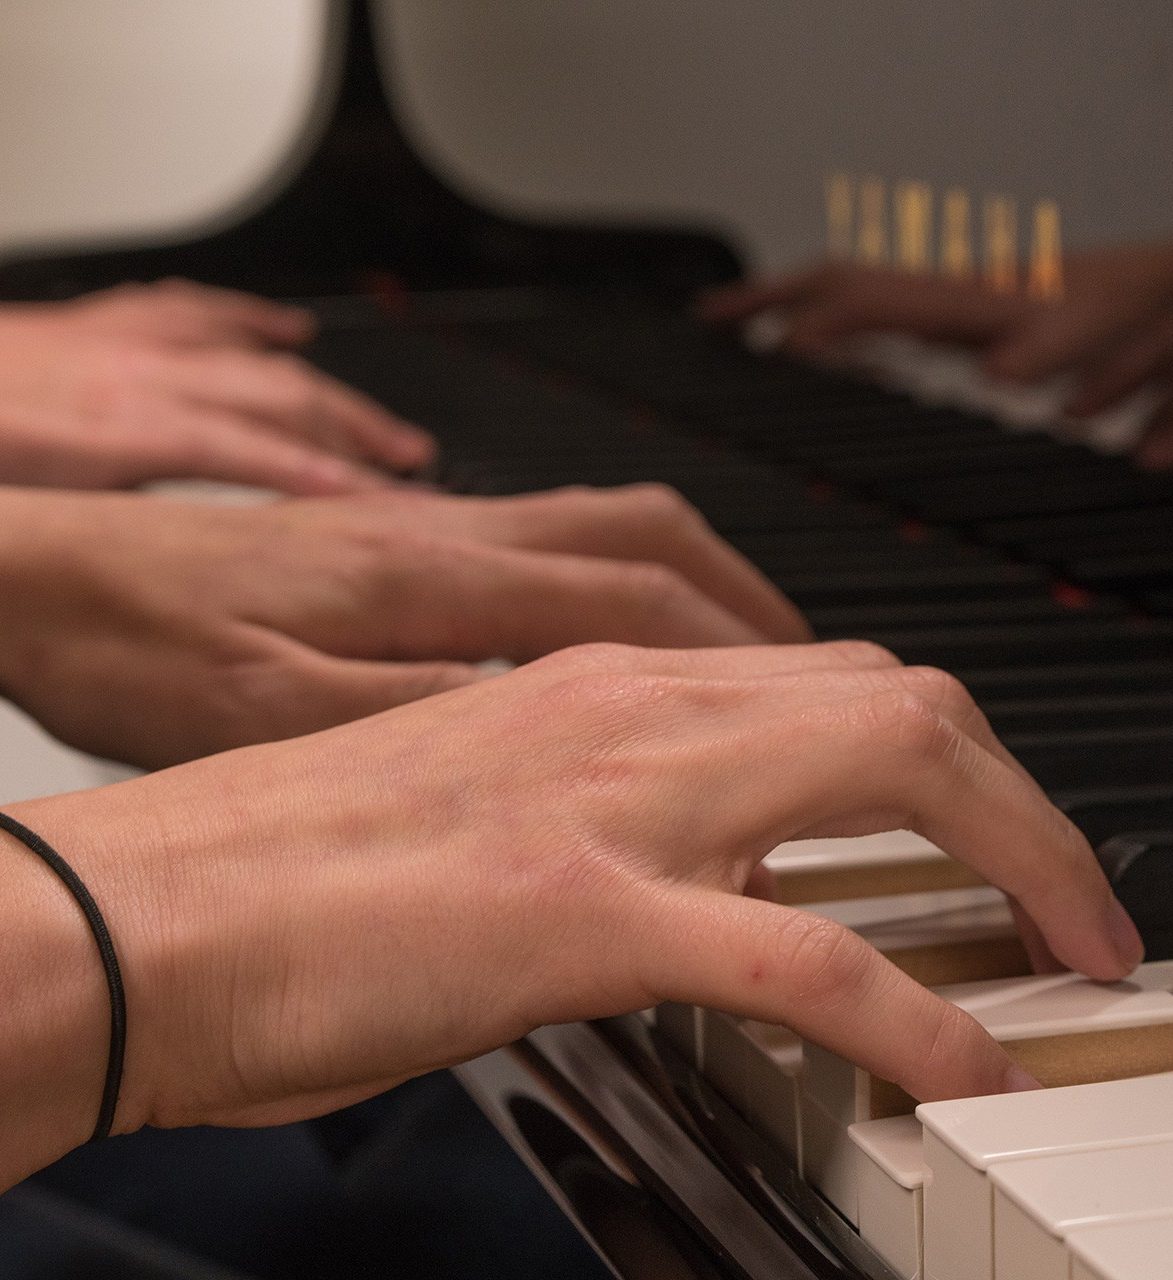 Close up of 4 hands on a piano keyboard; hands in the foreground are in focus.